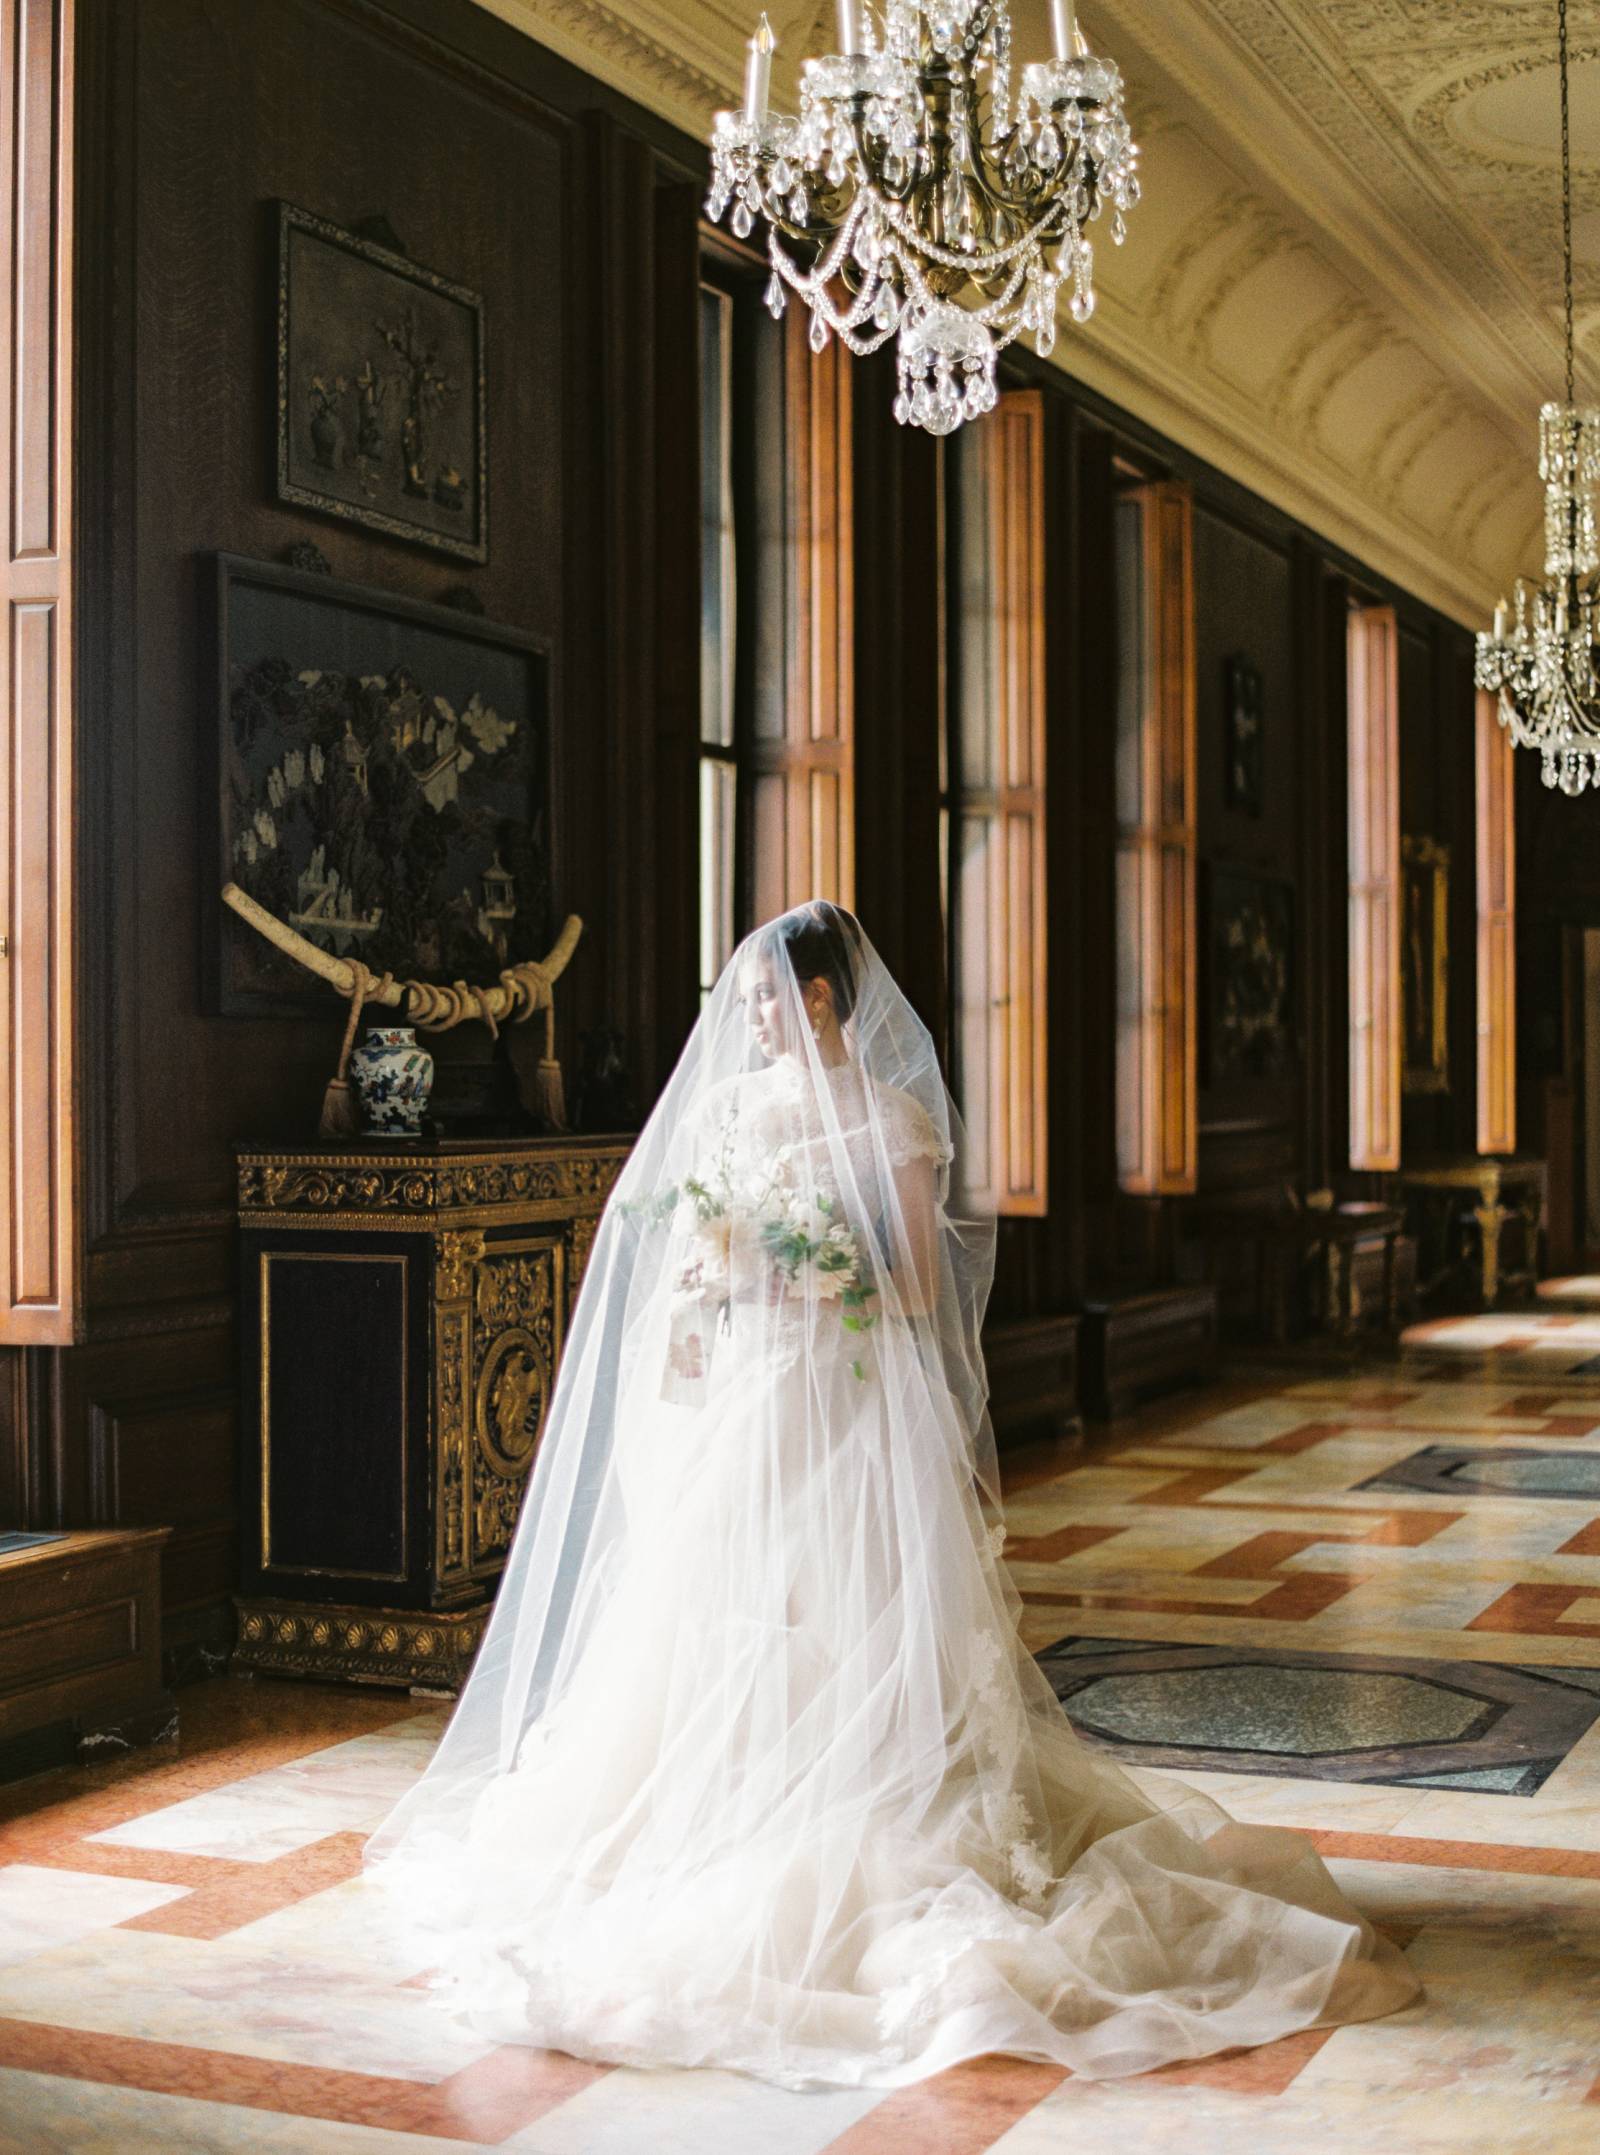 A slice of European opulence in this wedding editorial in the midst of ...